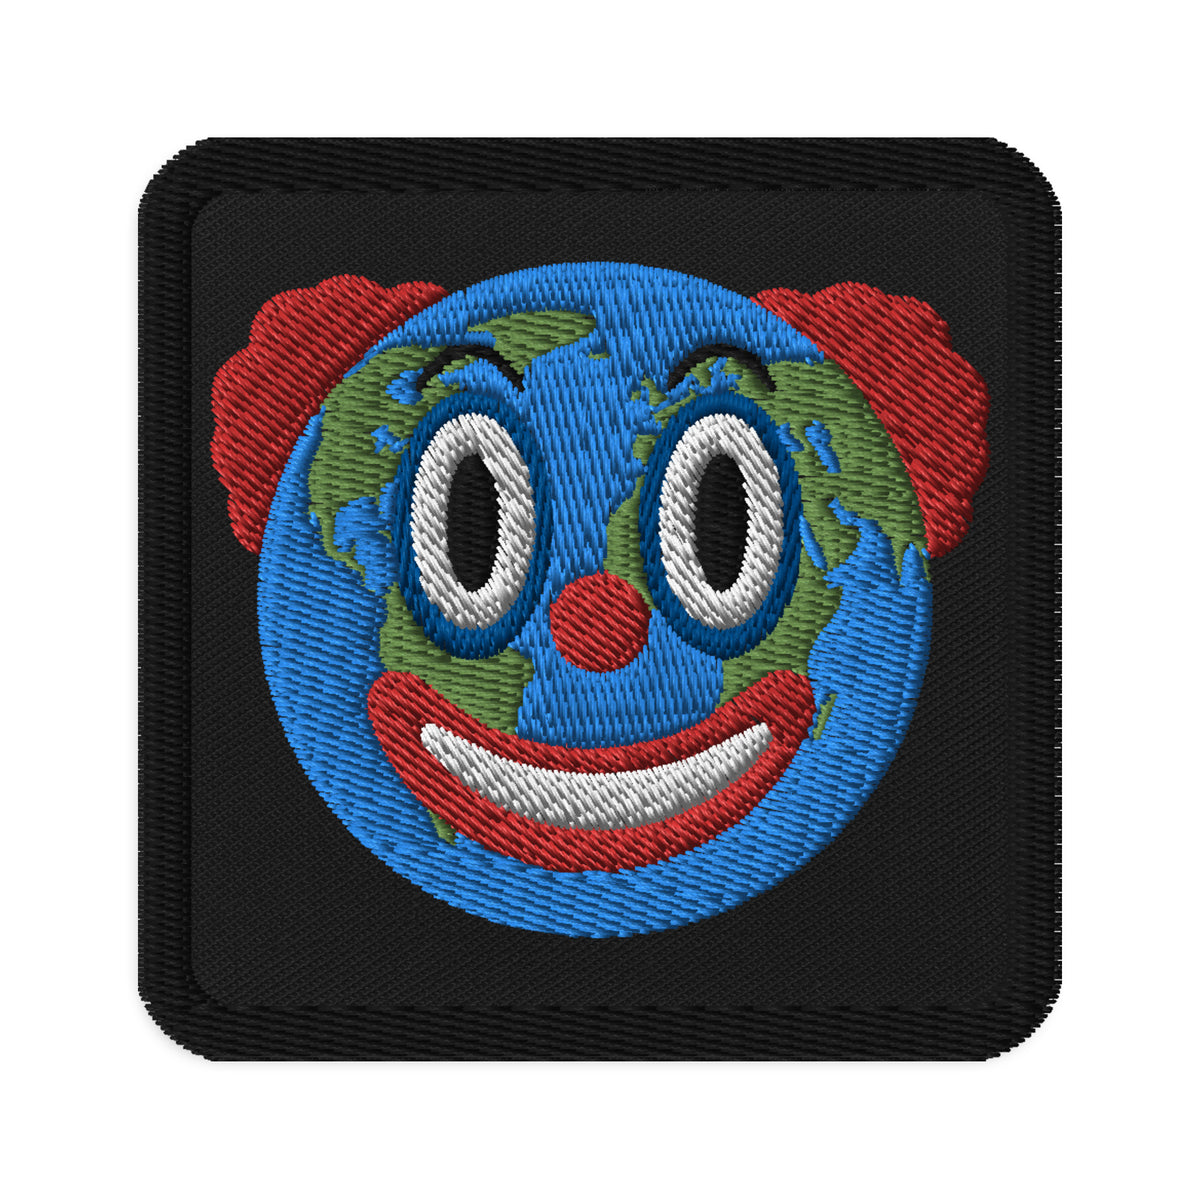 Clown World Embroidered patches - Liberty Maniacs